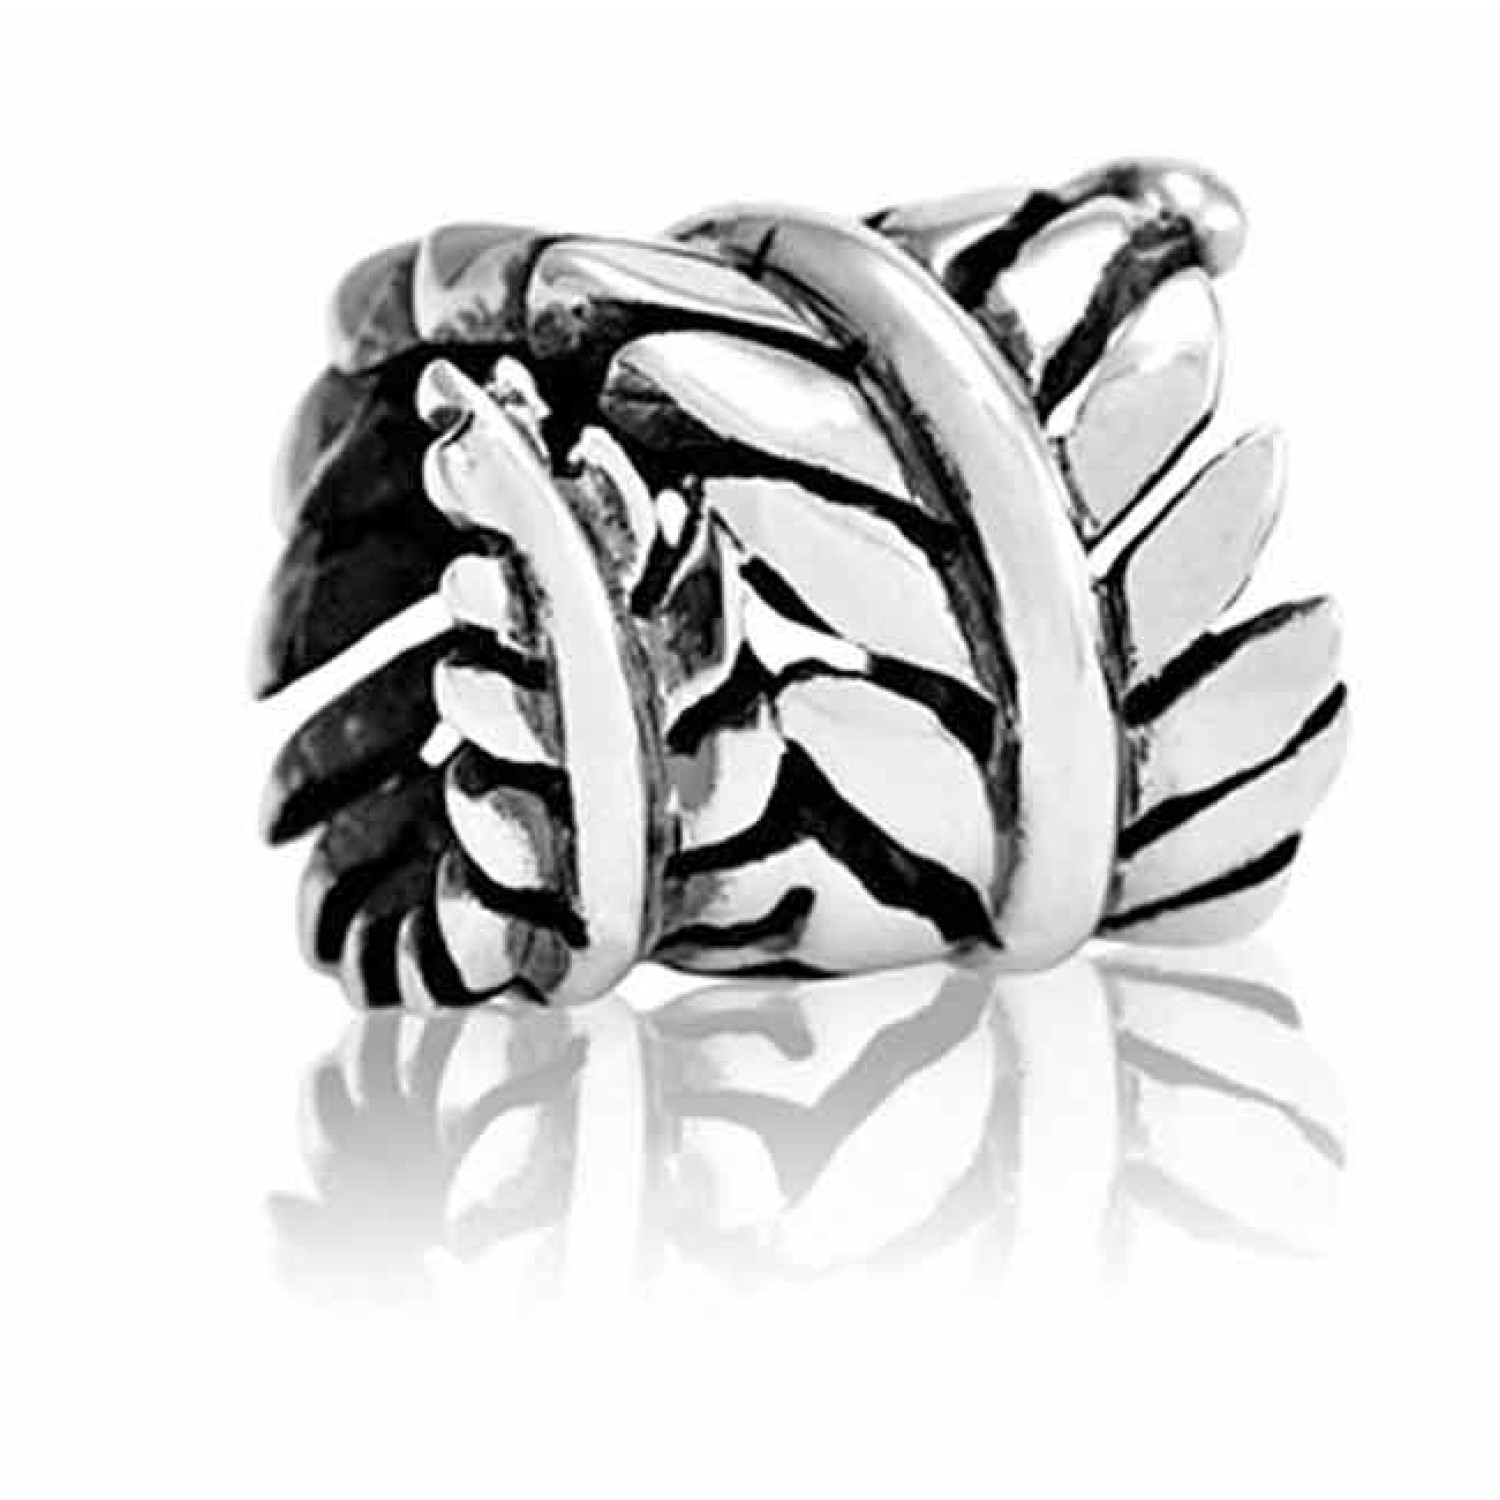 LKF014 Evolve Charm Eternal Fern. Evolves stunning Eternal Fern design is inspired by the leaves of New Zealand’s iconic silver fern. As the fern curls round in an endless spiral, it celebrates our continuous growth as individuals, symbolising @christies.